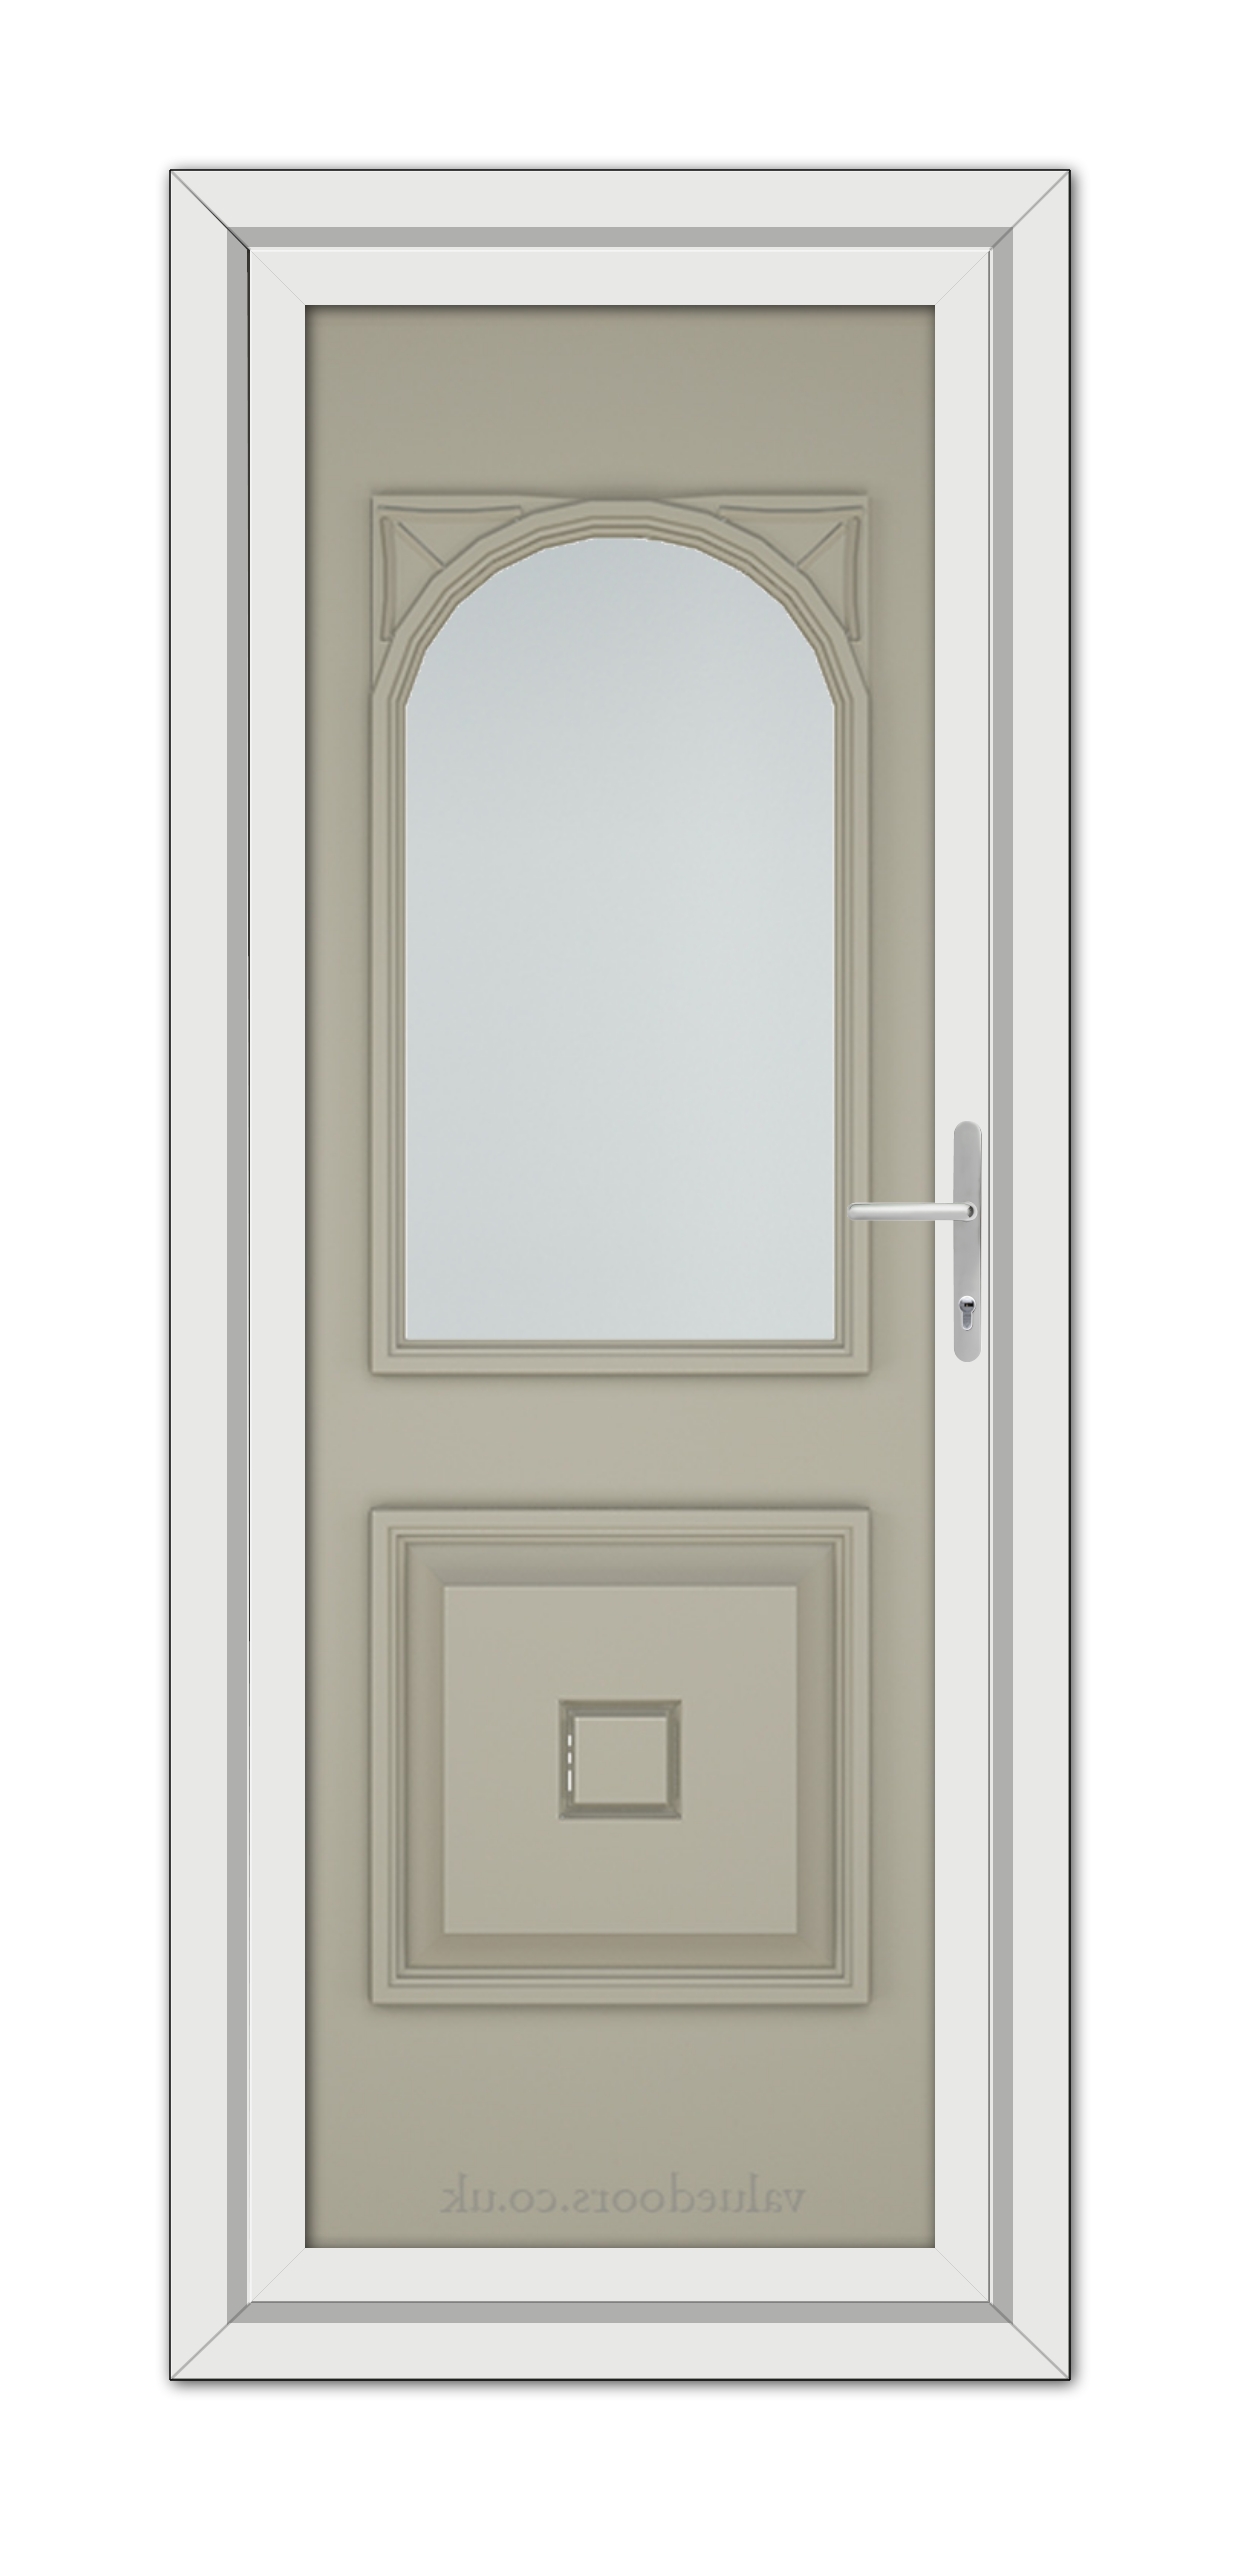 A vertical image of a closed Pebble Grey Reims uPVC Door in white with an arched mirror and a silver handle.